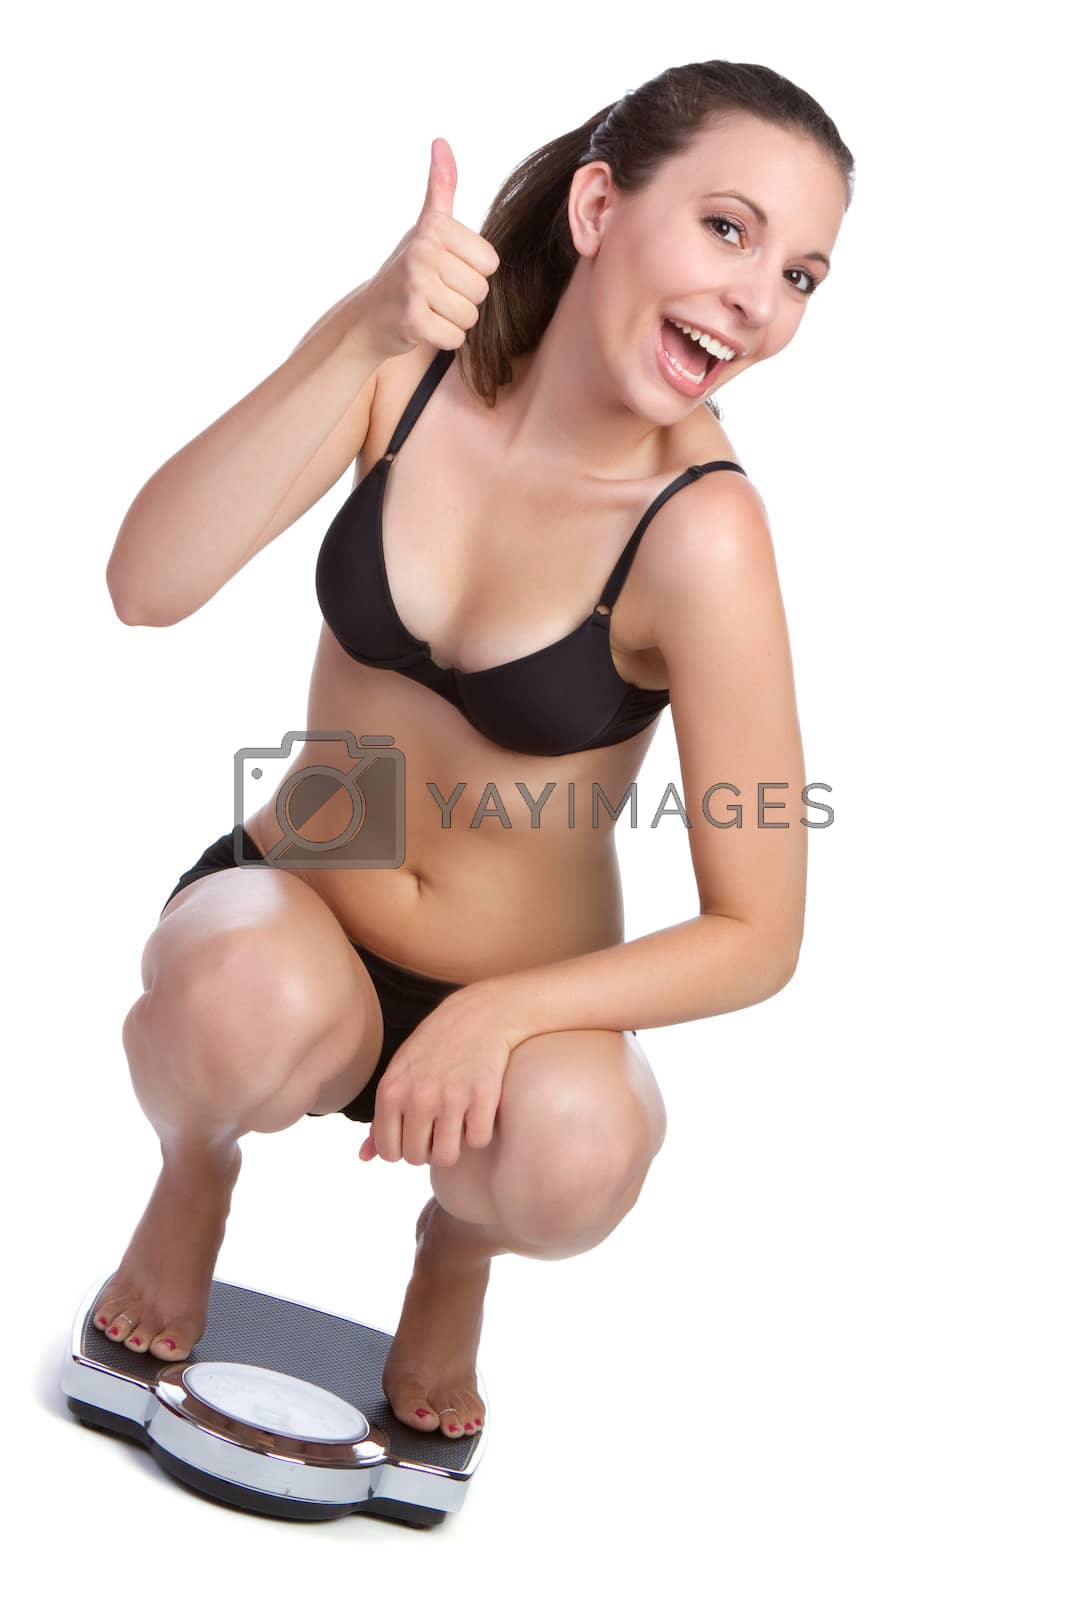 Royalty free image of Weight Loss Woman by keeweeboy